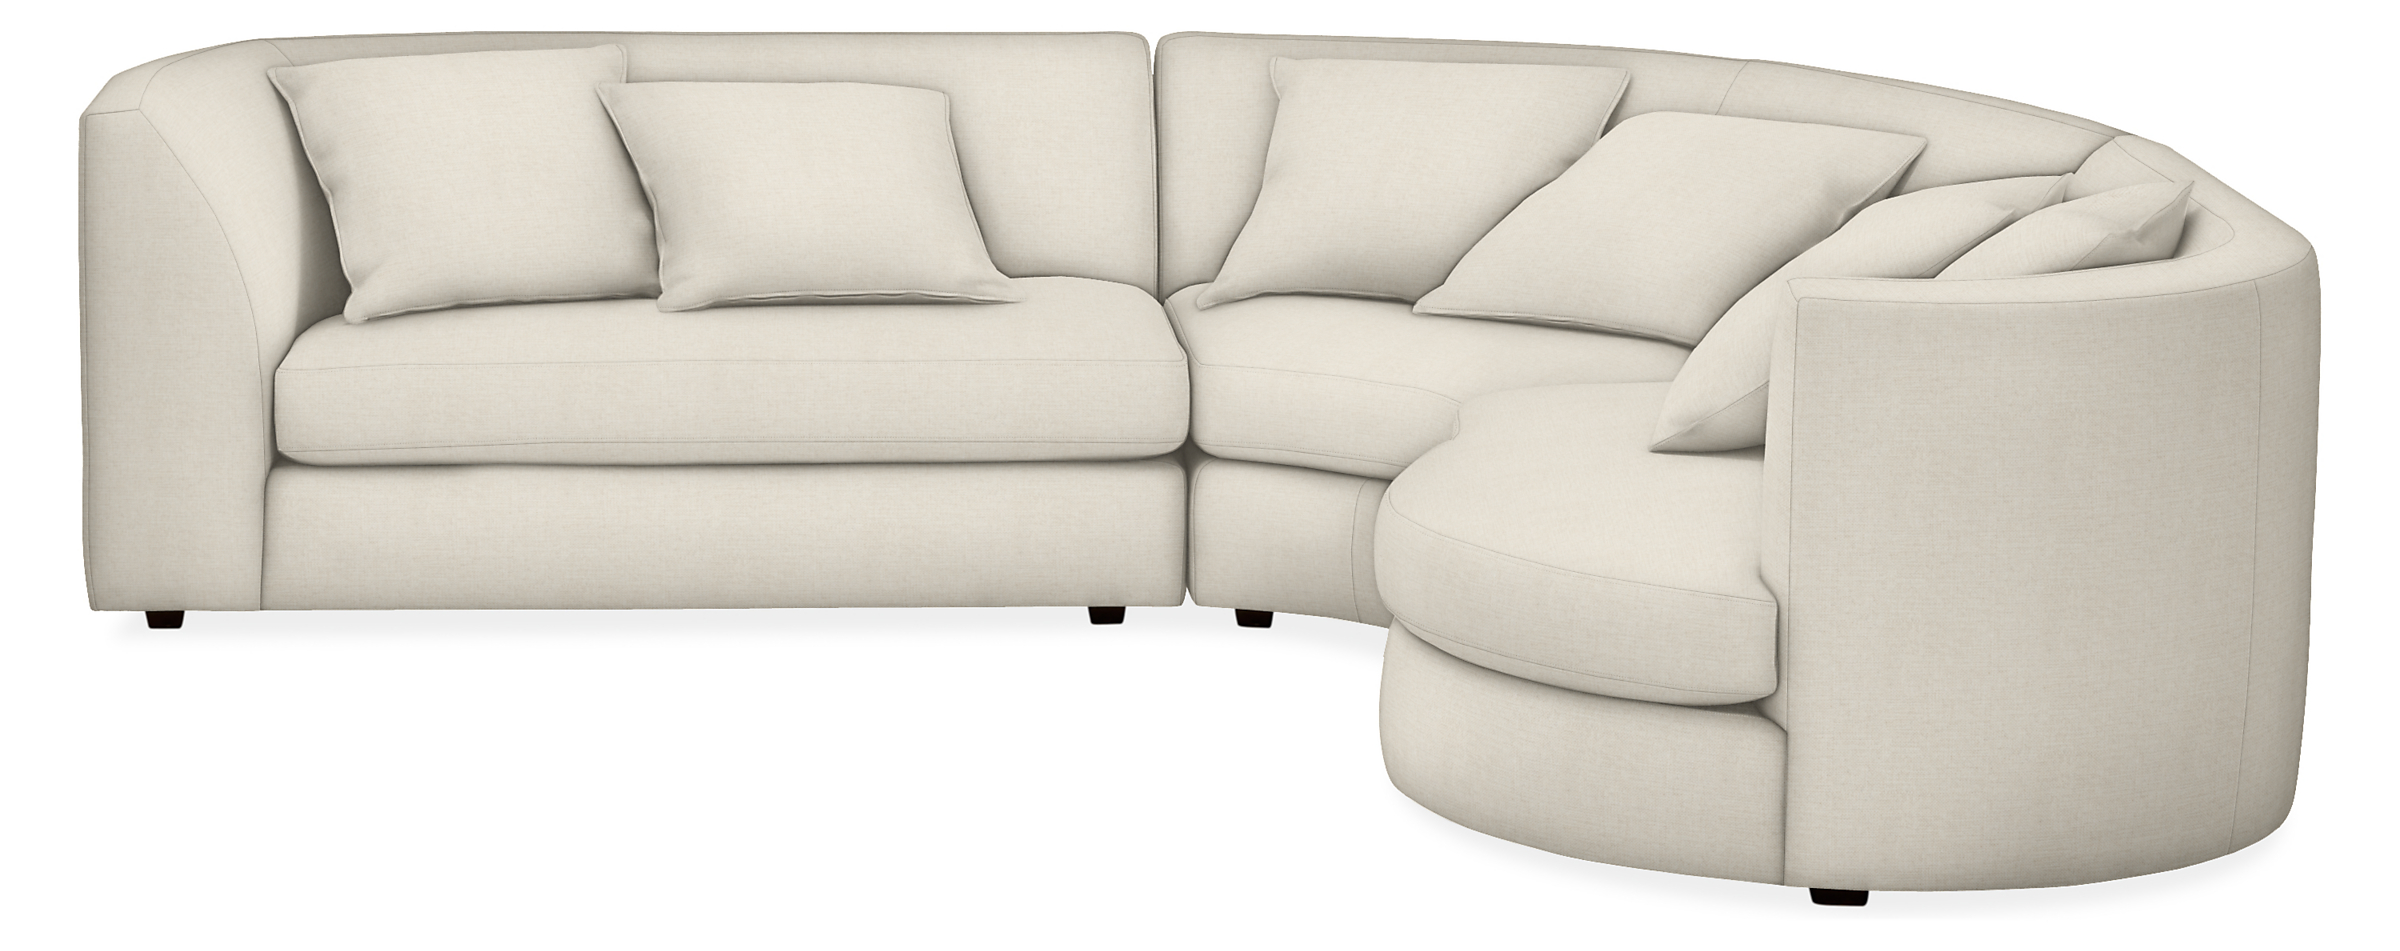 Astaire 110x100" Three-Piece Left-Arm Sofa Sectional